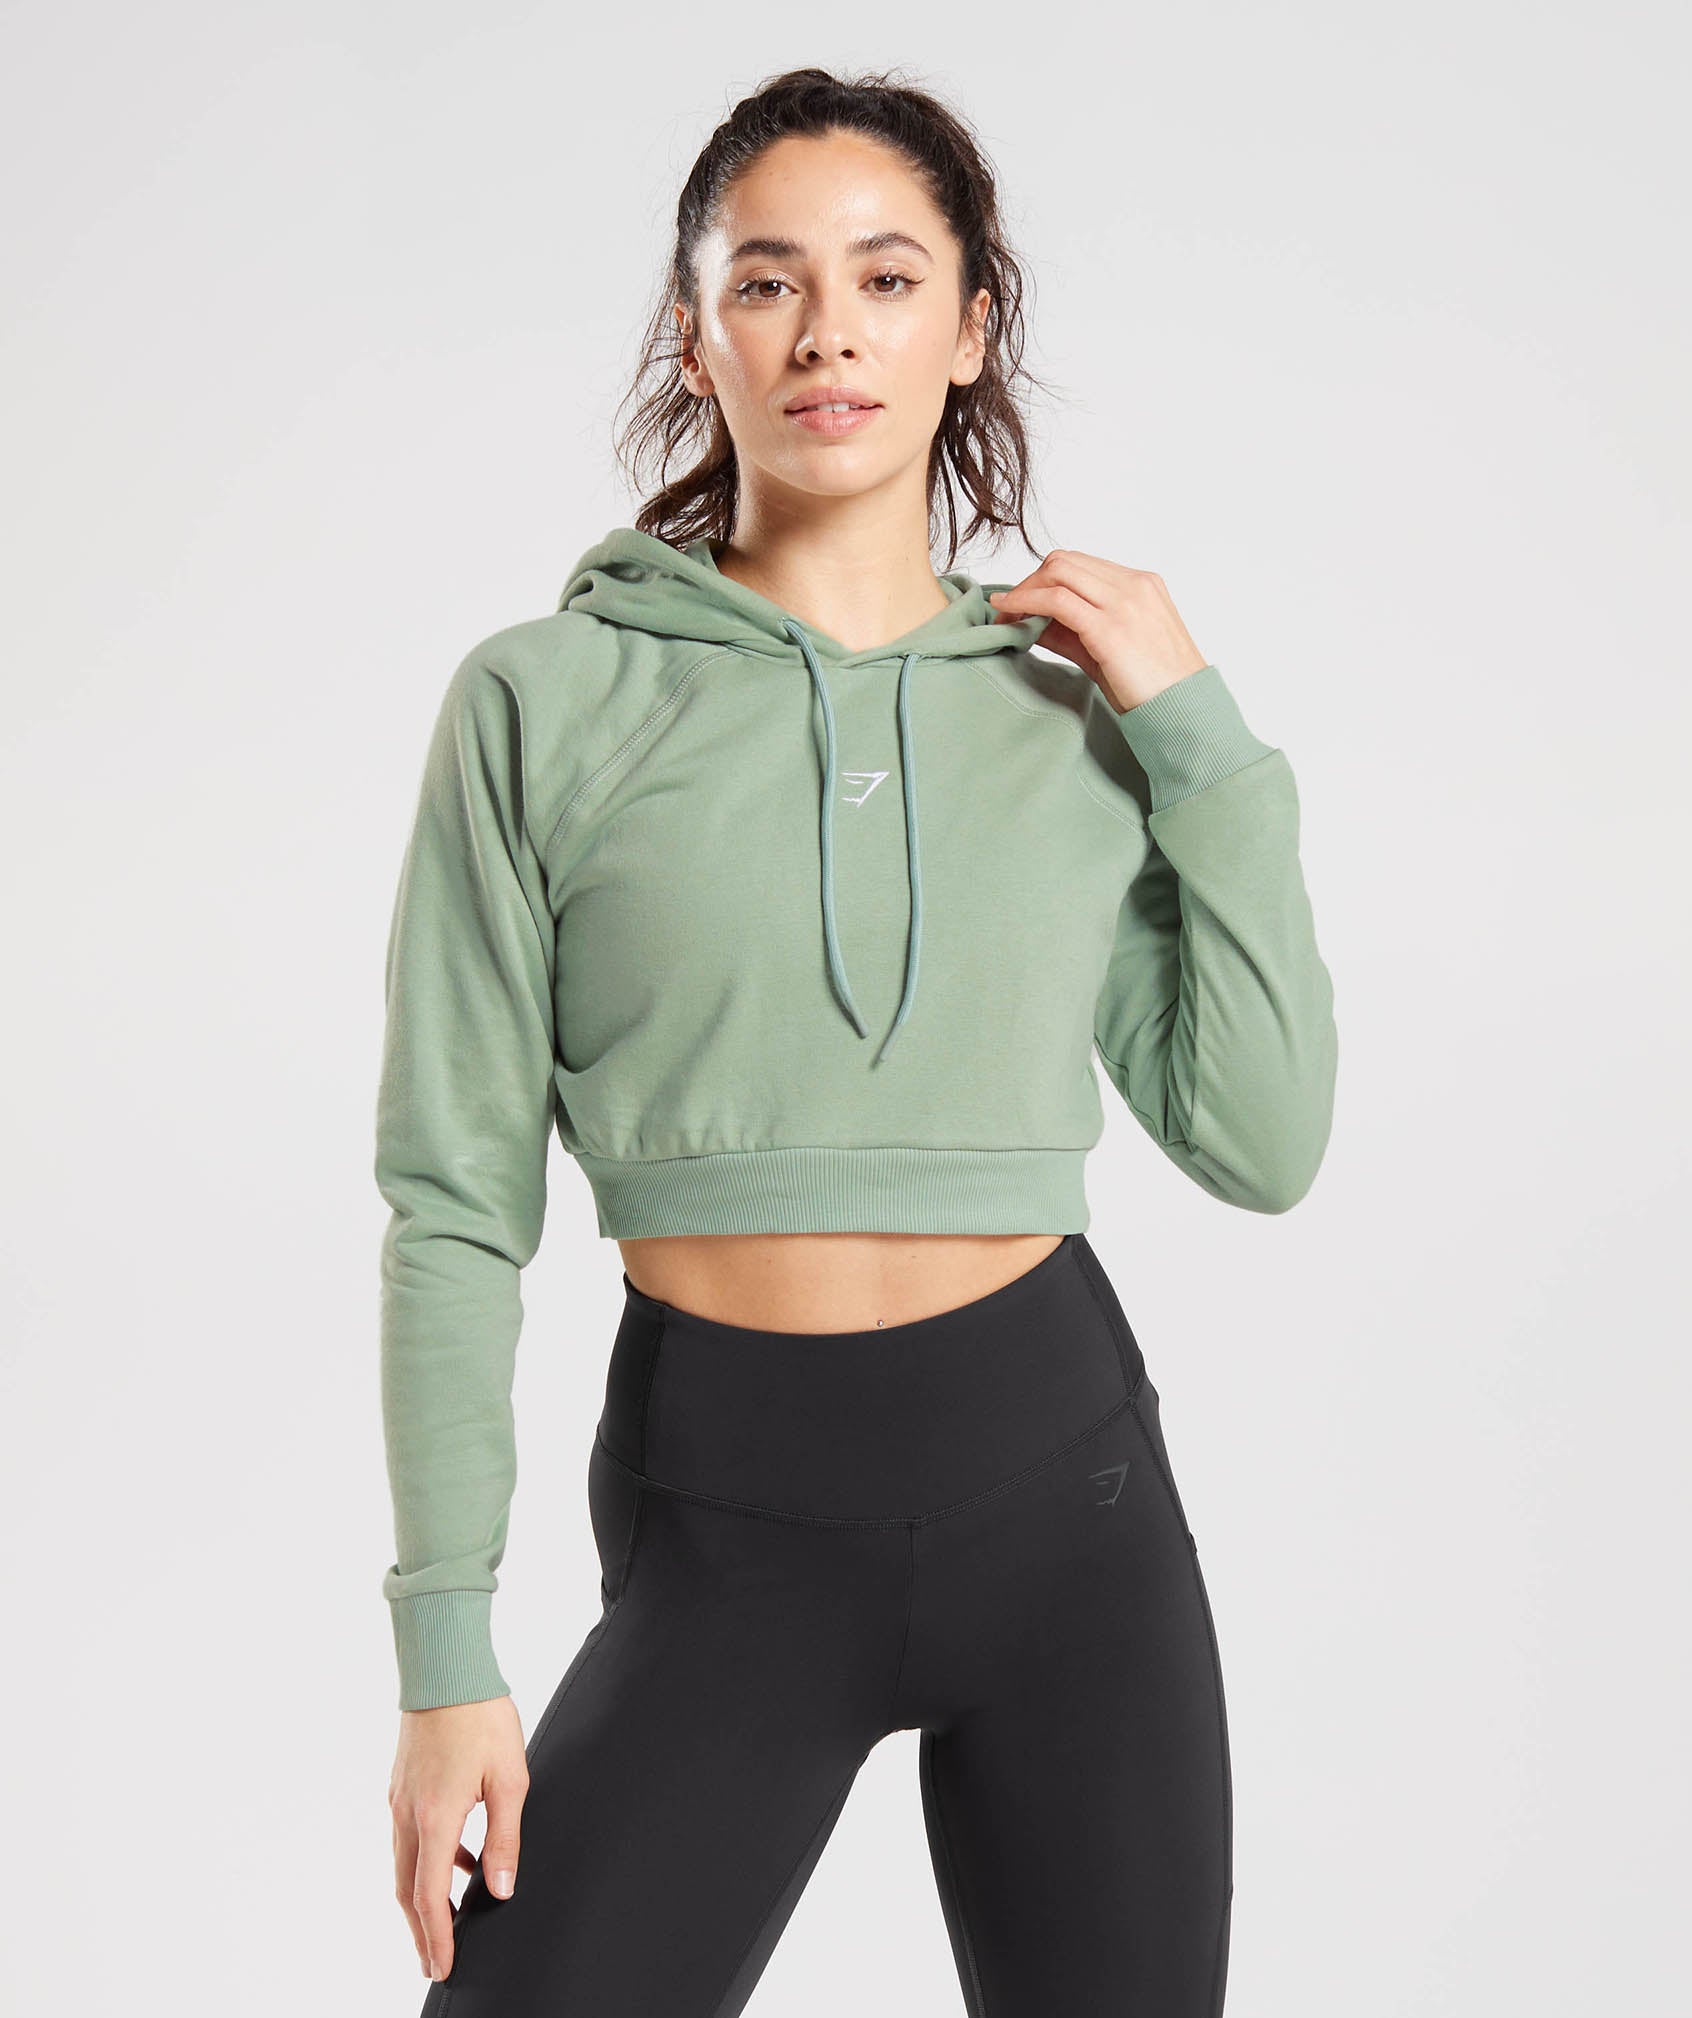 Gymshark Training Crop Sweater - Penny Brown